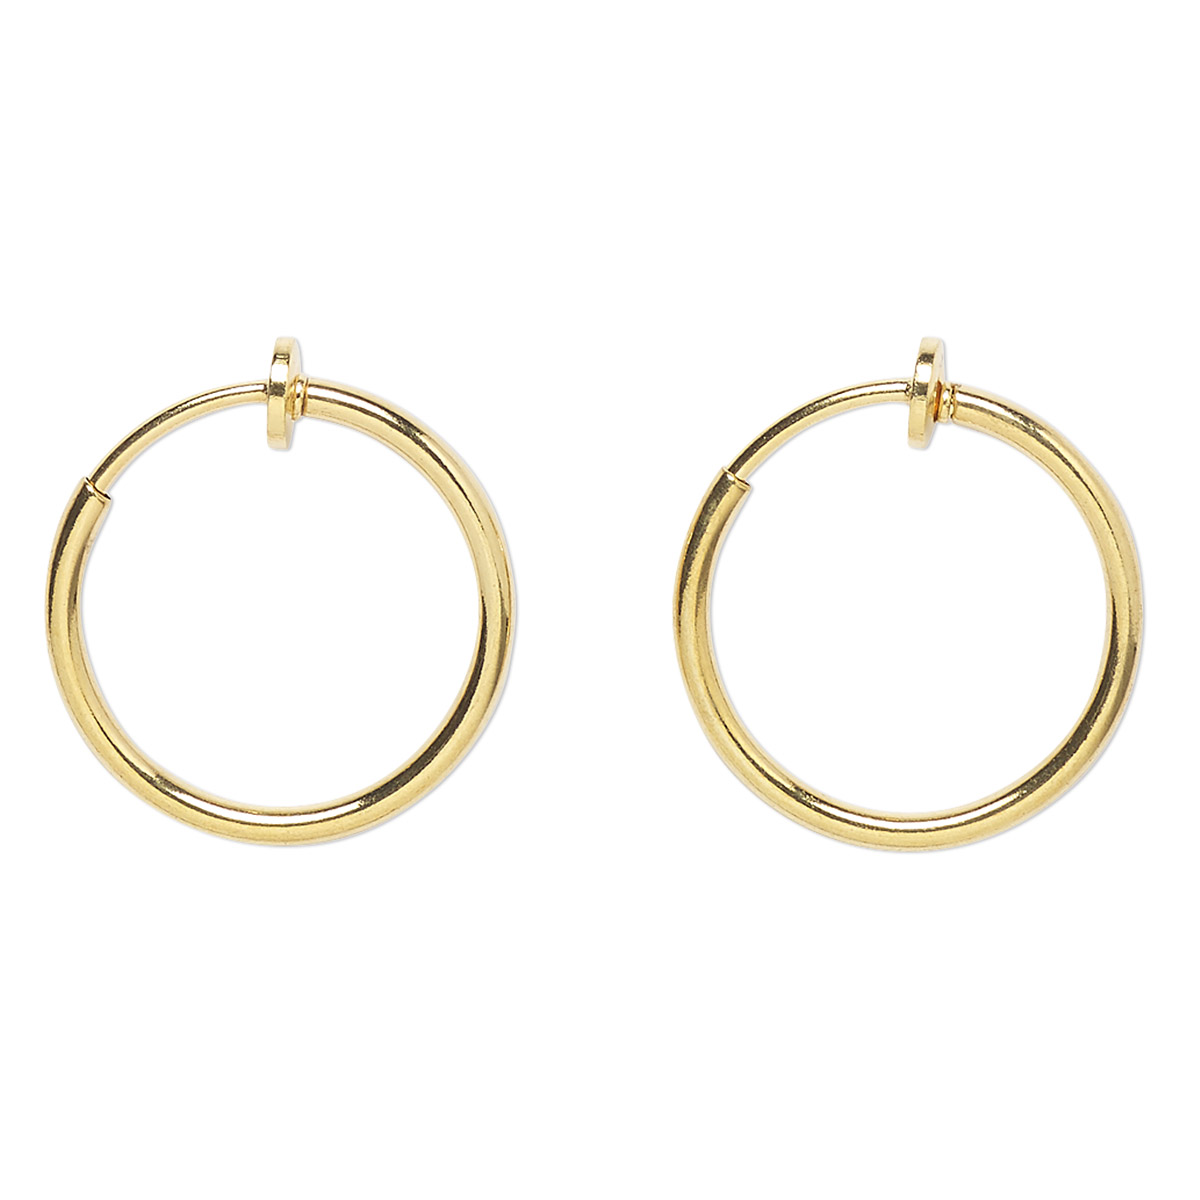 Earring, gold-plated brass, 17mm hoop with pierced-look spring closure ...